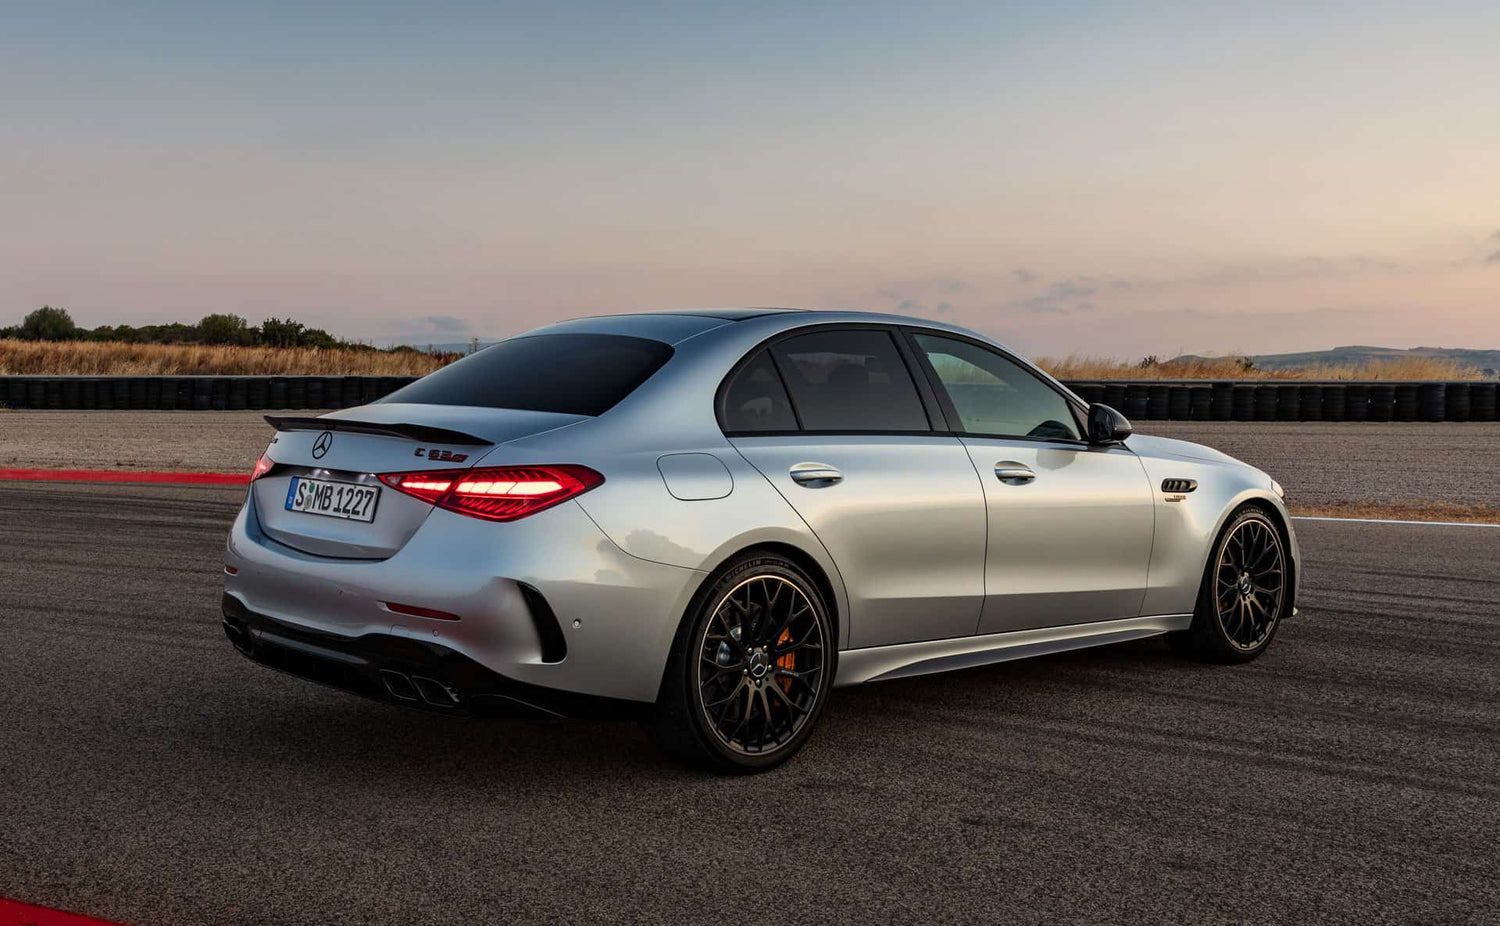 671hp From 2 Litres. The All-New Mercedes-AMG C63 S